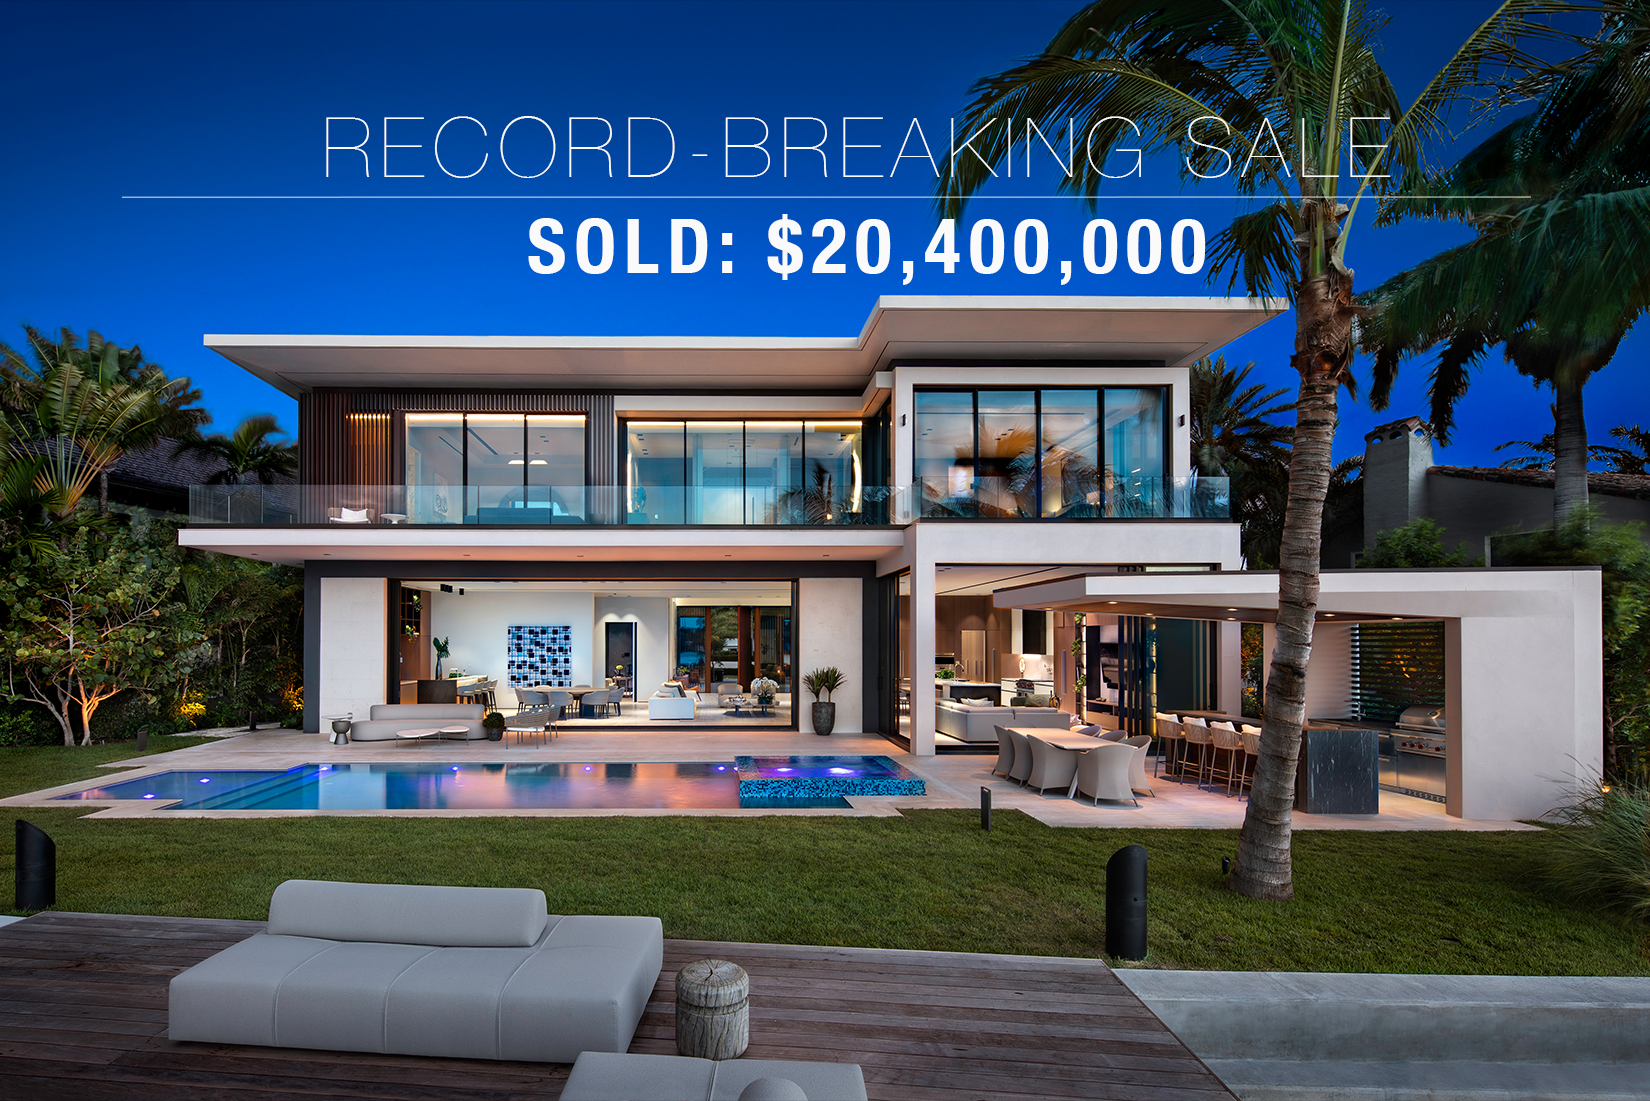 Record-Breaking Sale of 10 W San Marino Drive, Miami Beach – Mansion on Venetian Islands Sold by Top Realtor Nelson Gonzalez